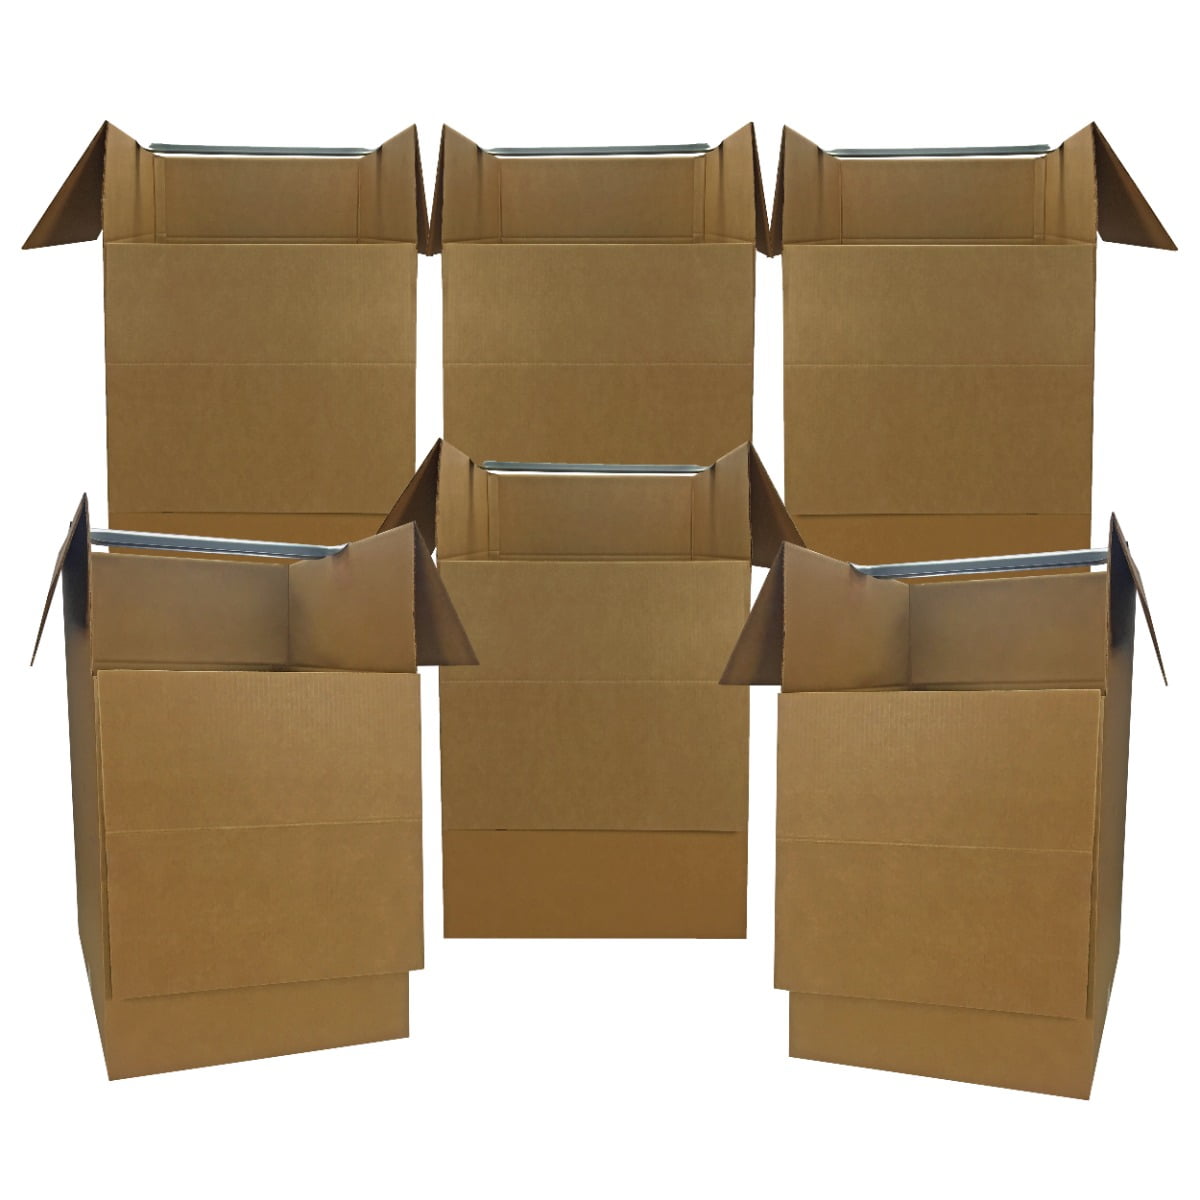 IDL Packaging Large Corrugated Moving Boxes 33L x 14”W x 14H Pack of 5 Excellent Choice of Strong Packing Boxes for Moving or Relocating 